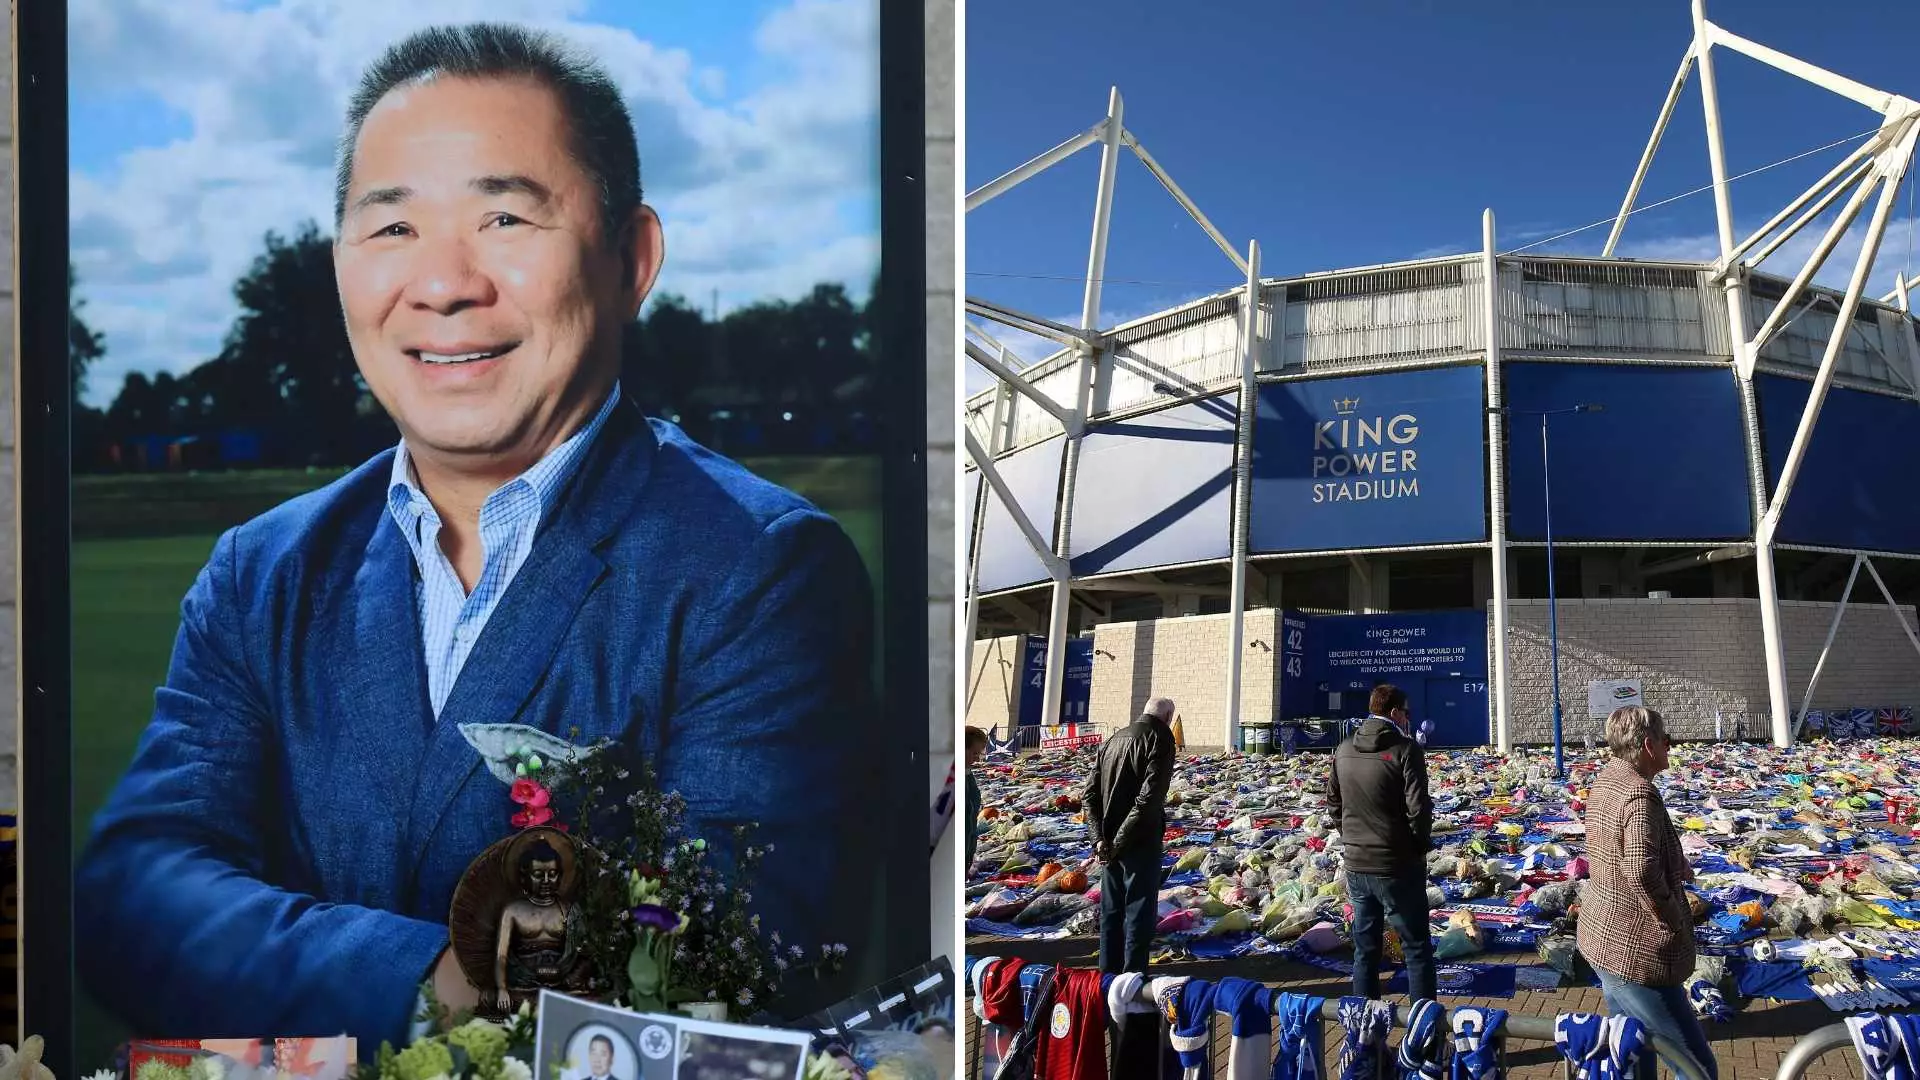 Petition Calling For Statue Of Srivaddhanaprabha Outside King Power Stadium Passes 30,000 Signatures